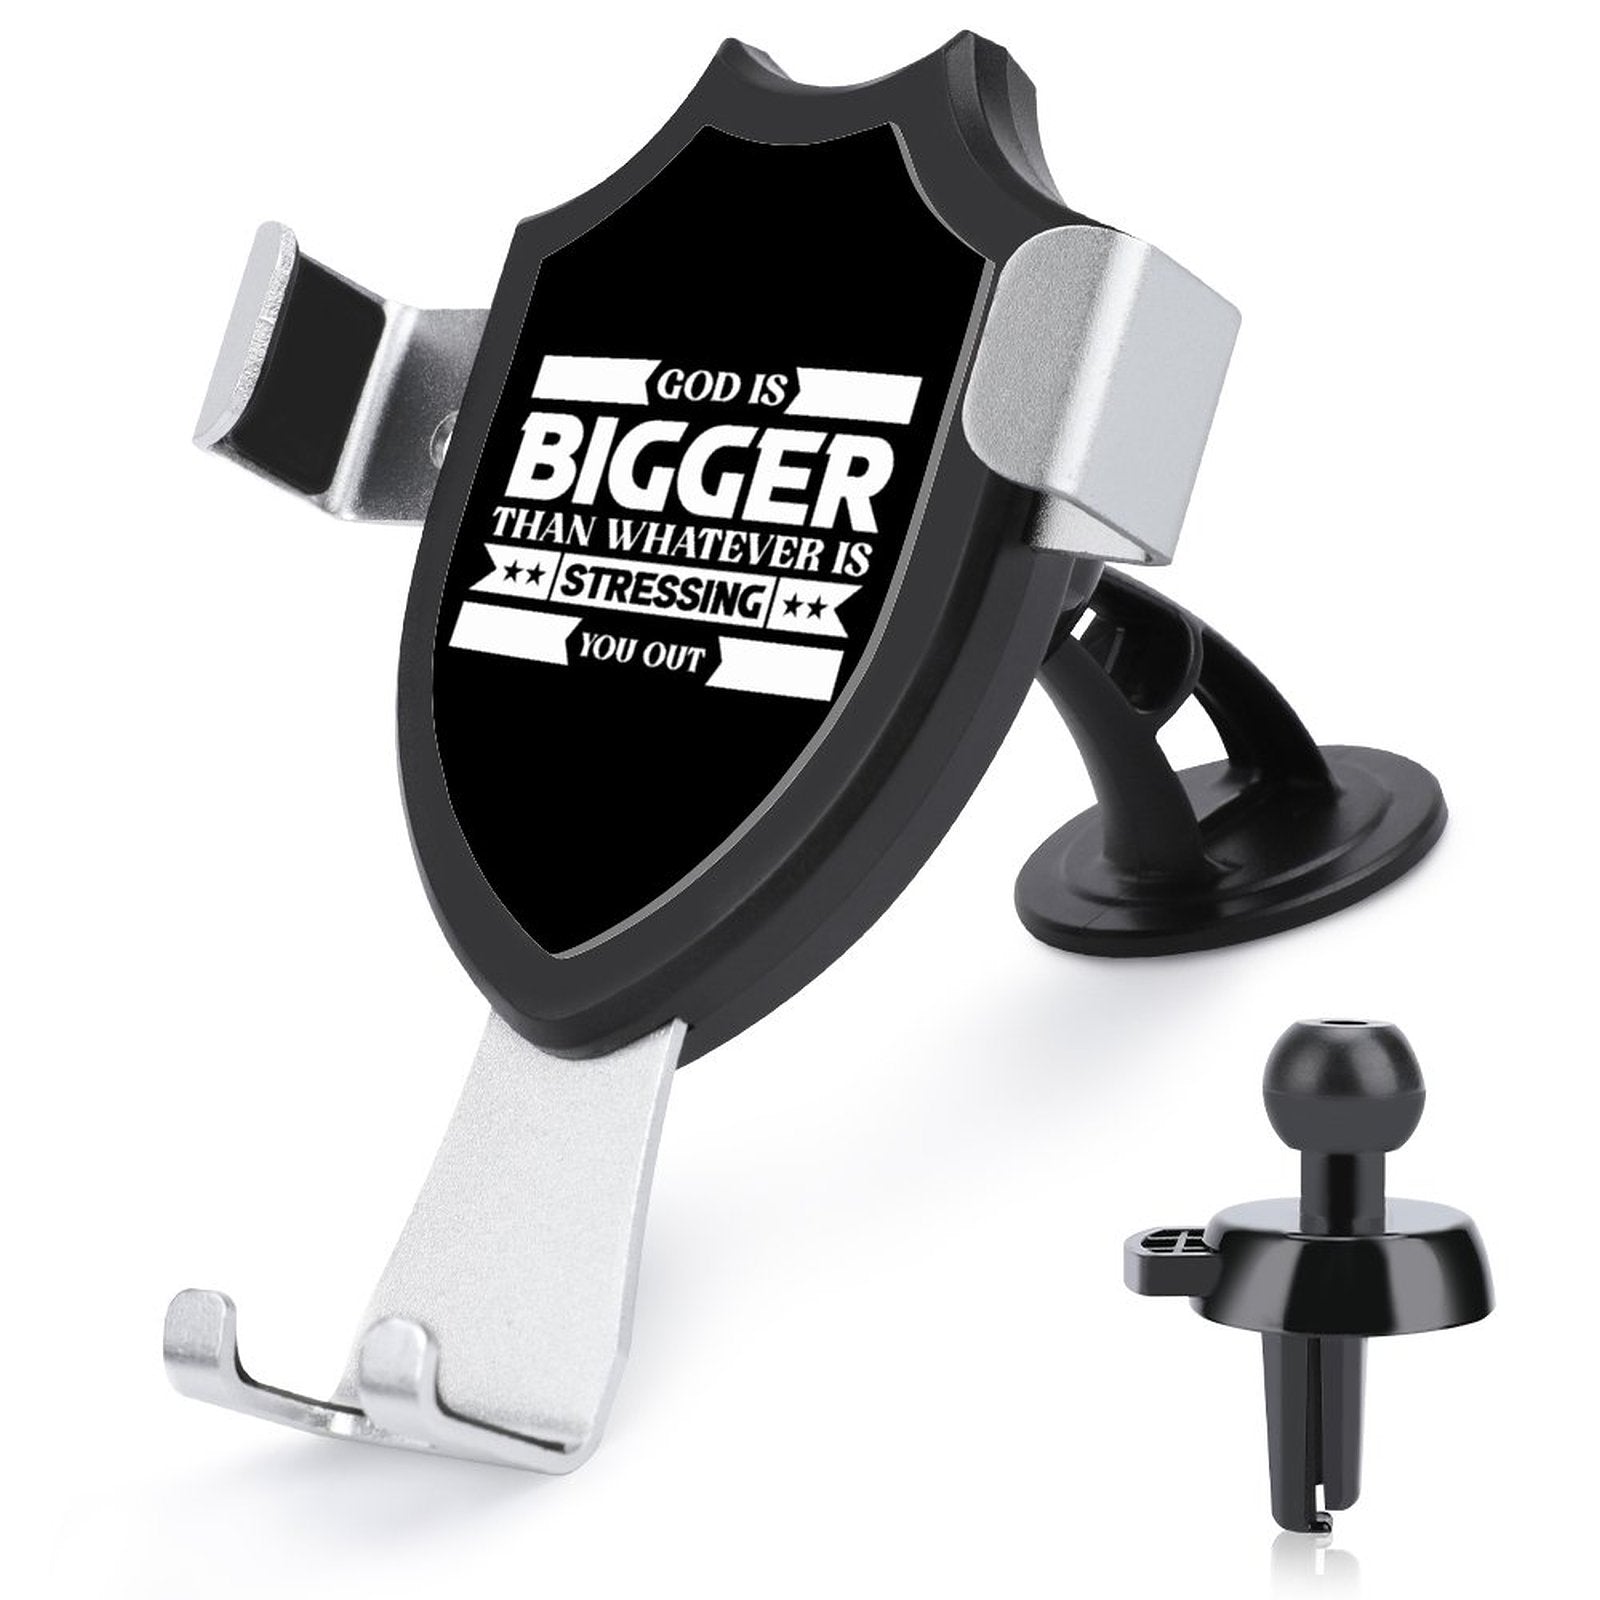 God Is Bigger Than Whatever Is Stressing You Out Christian Car Mount Mobile Phone Holder SALE-Personal Design